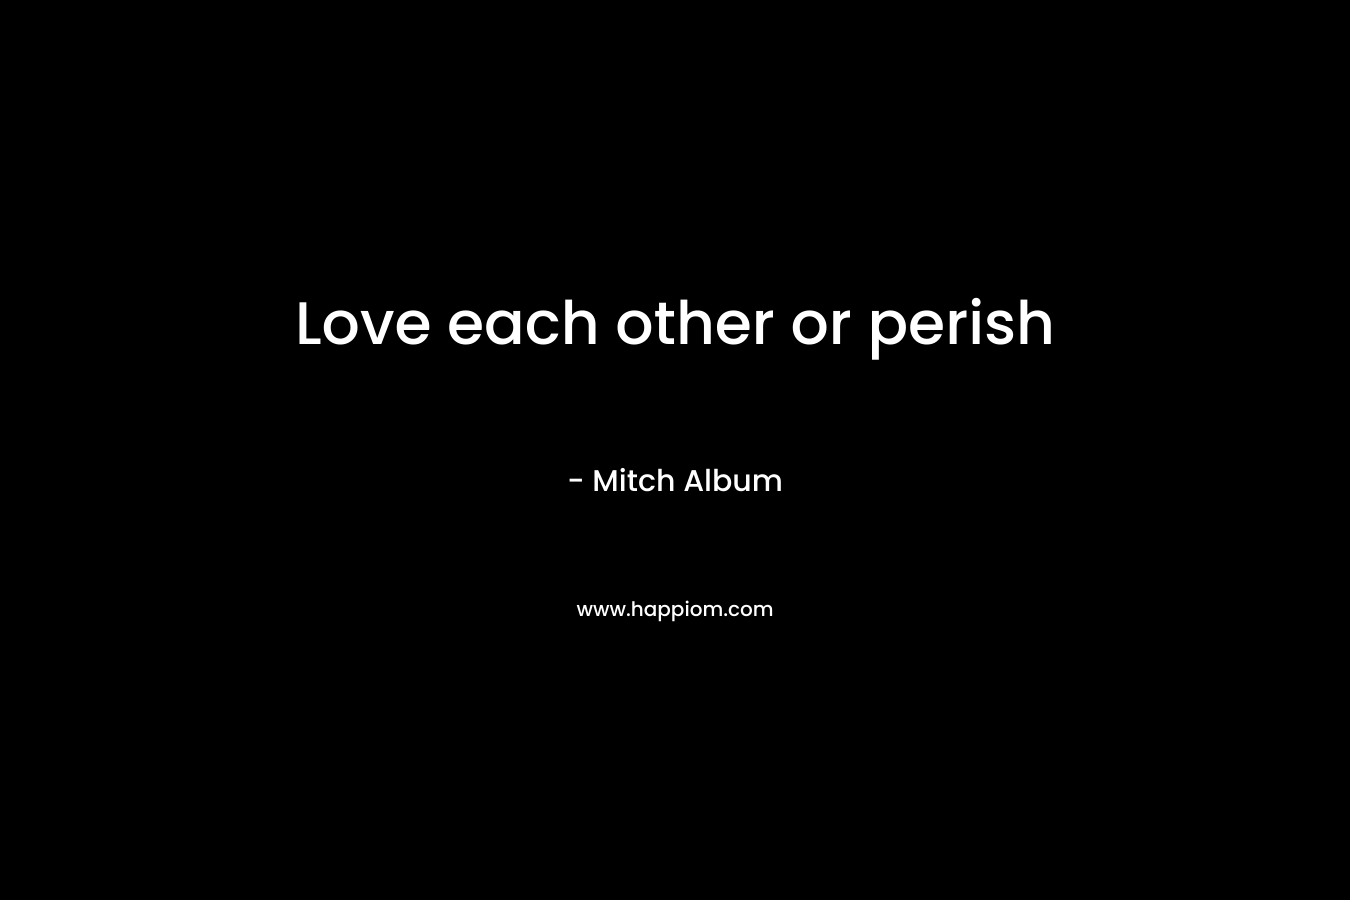 Love each other or perish